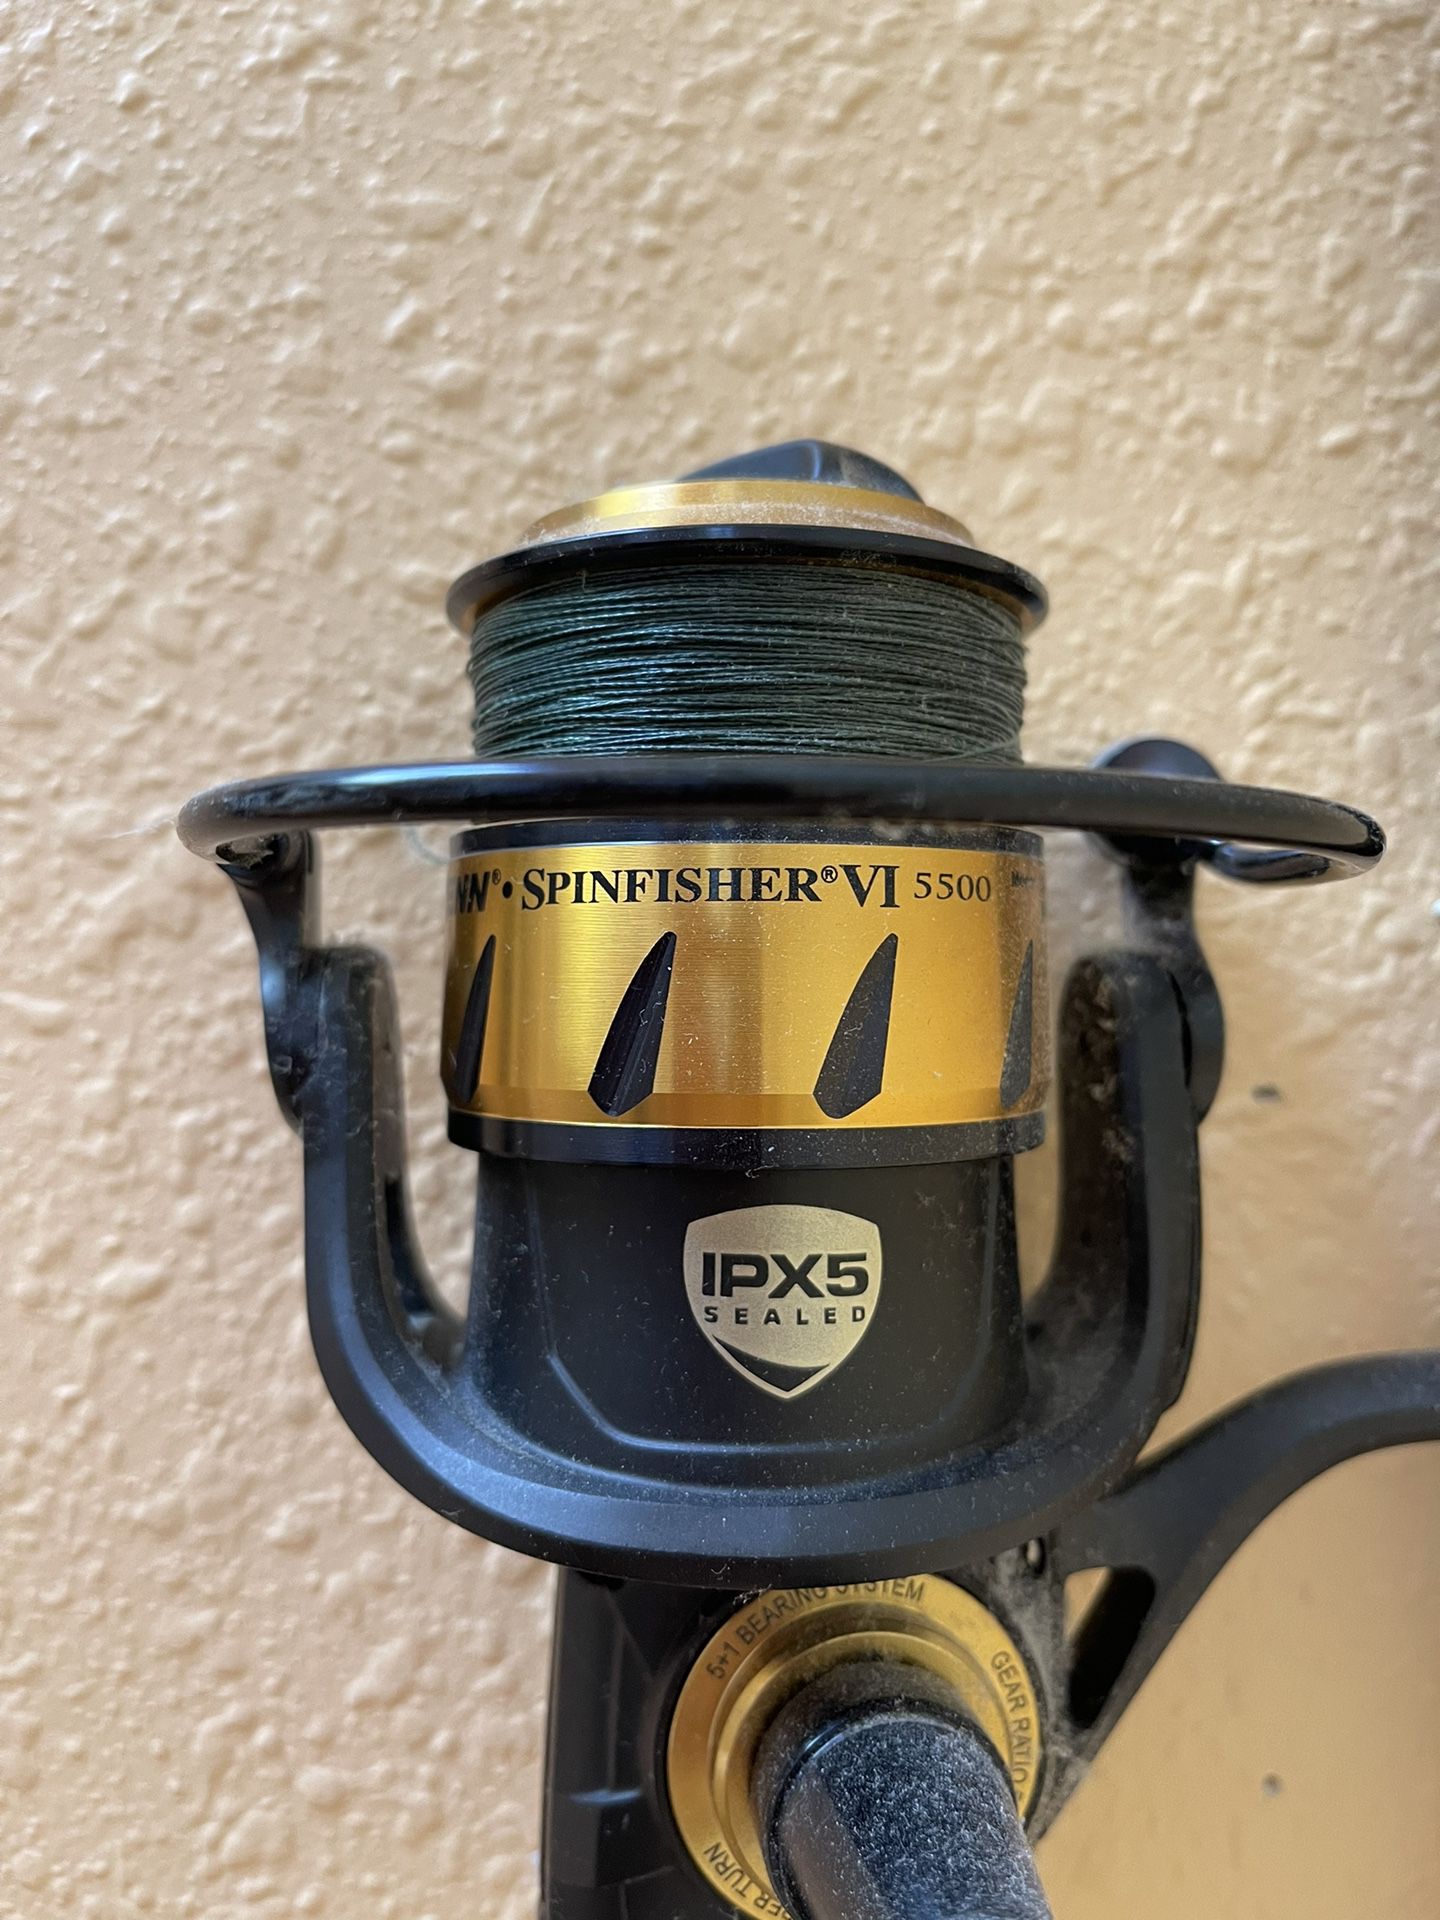 PENN SPINFISHER VI 5500 ROD AND REEL for Sale in Ruskin, FL - OfferUp